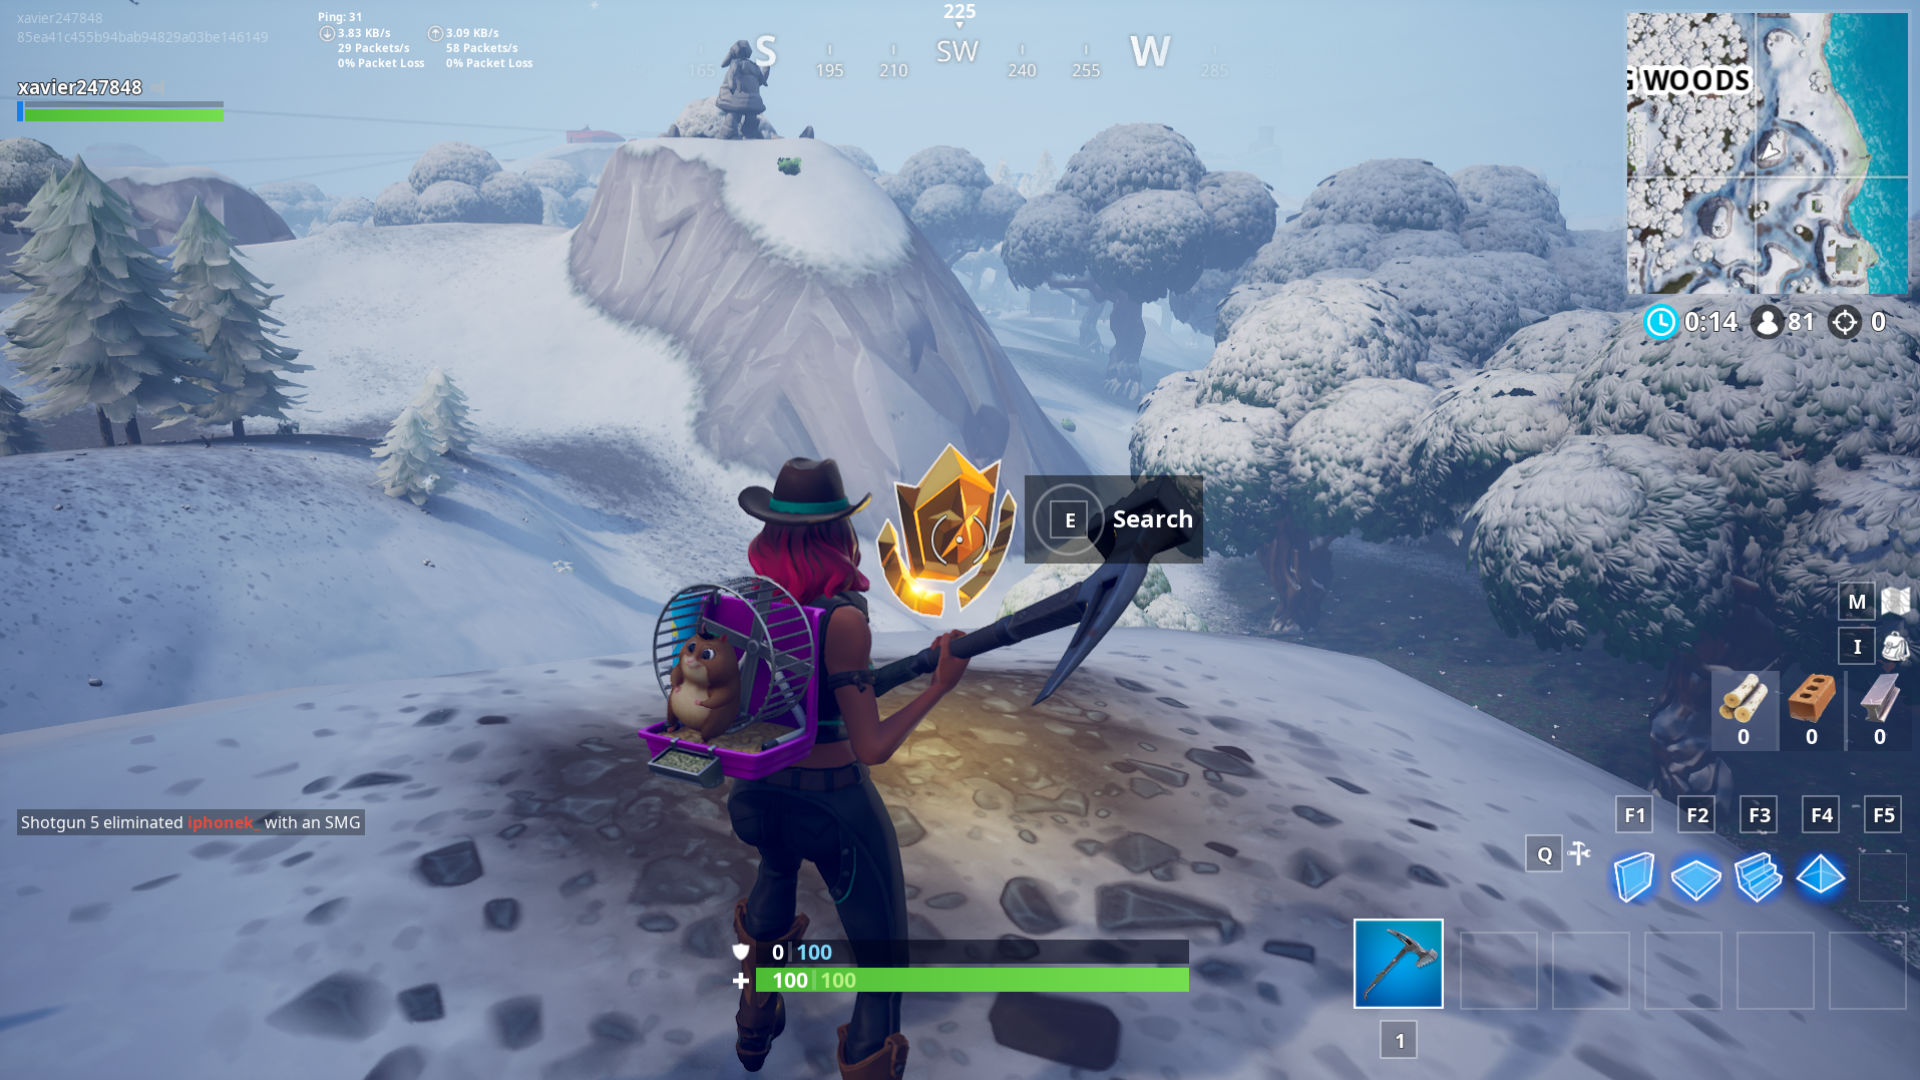 Fortnite Search Between A Mysterious Hatch A Giant Rock Lady And - fortnite search between mysterious hatch giant rock lady precarious flatbed week 8